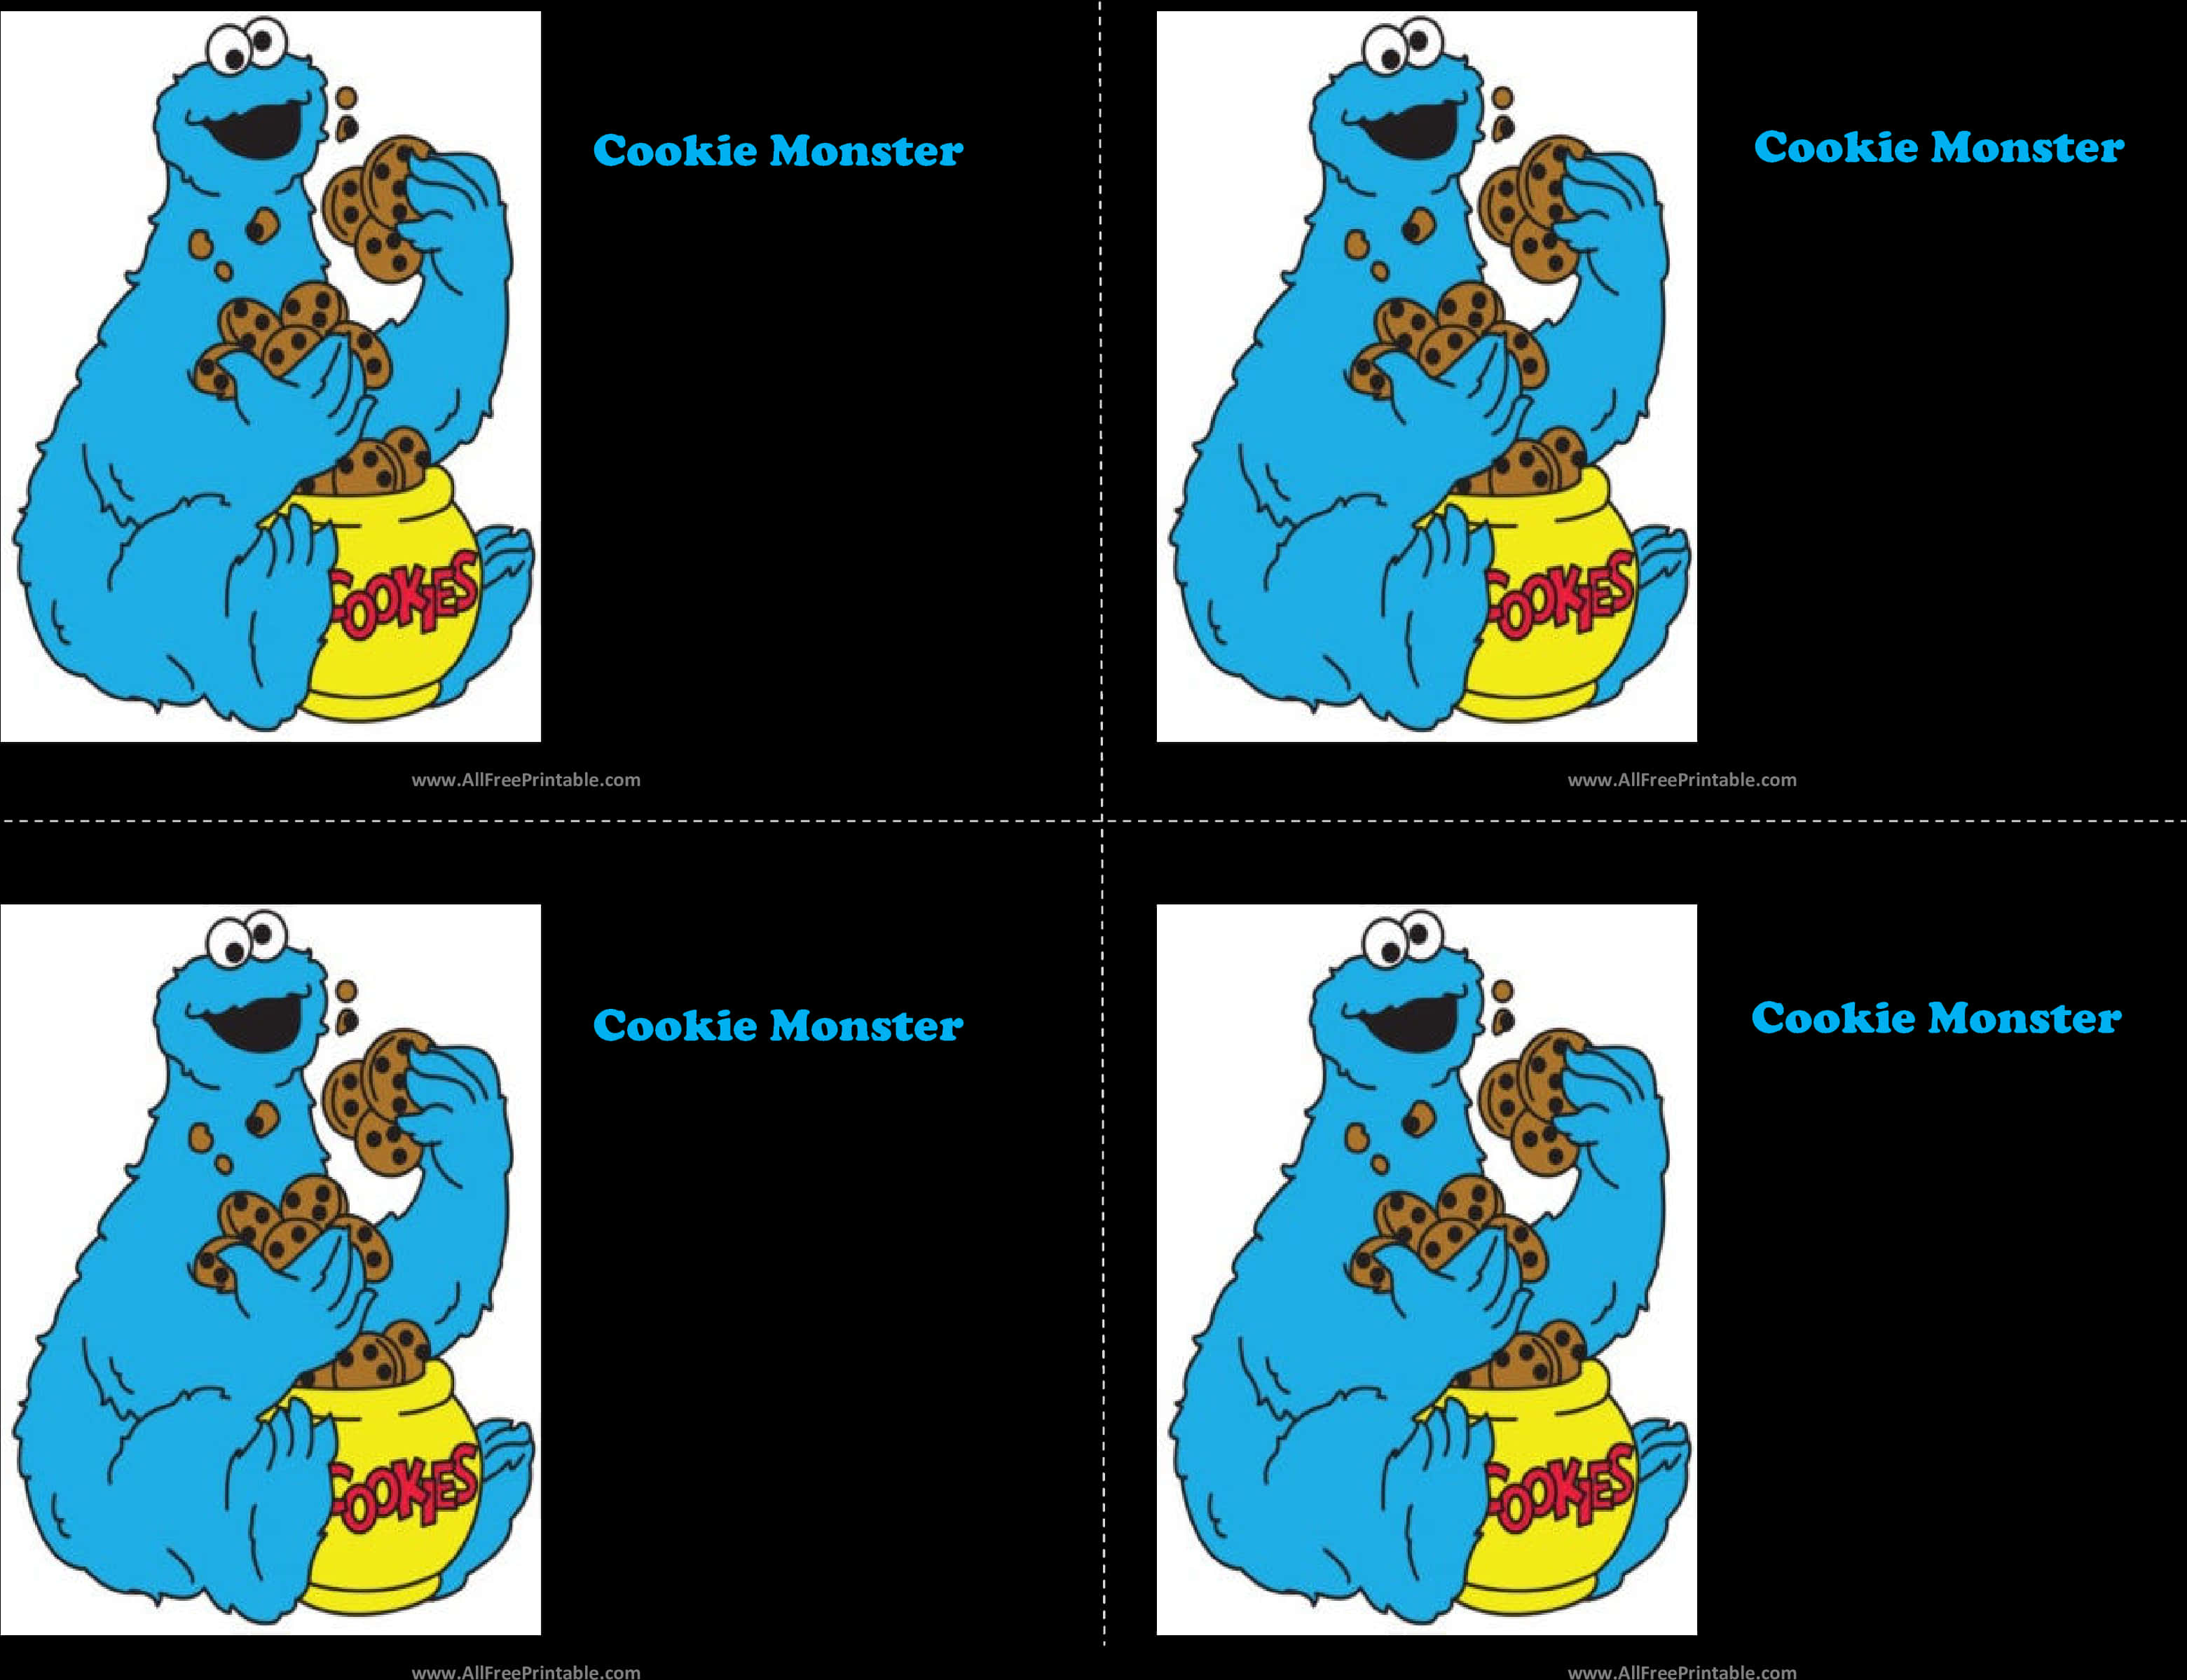 A Collage Of A Cartoon Cookie Monster